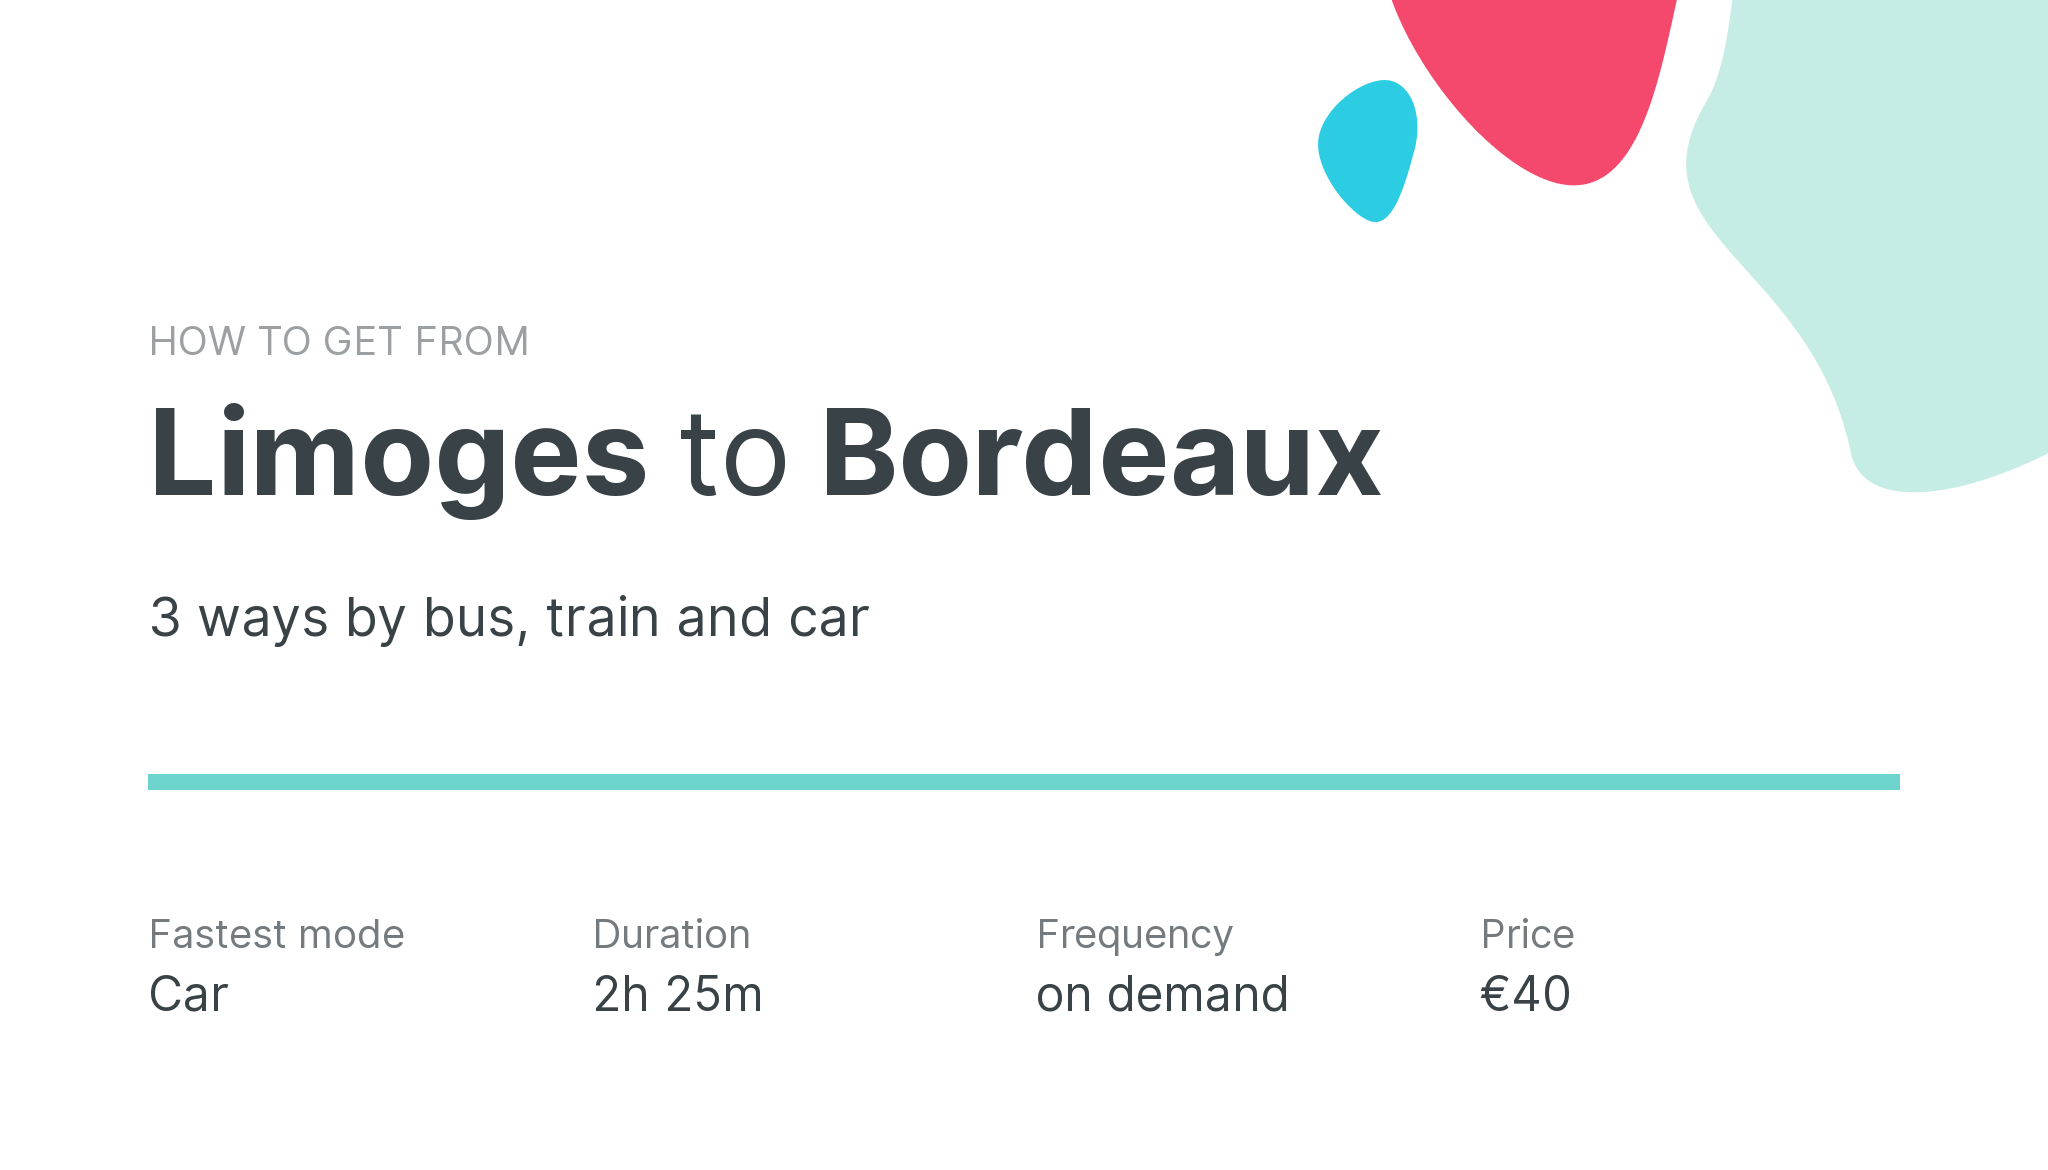 How do I get from Limoges to Bordeaux